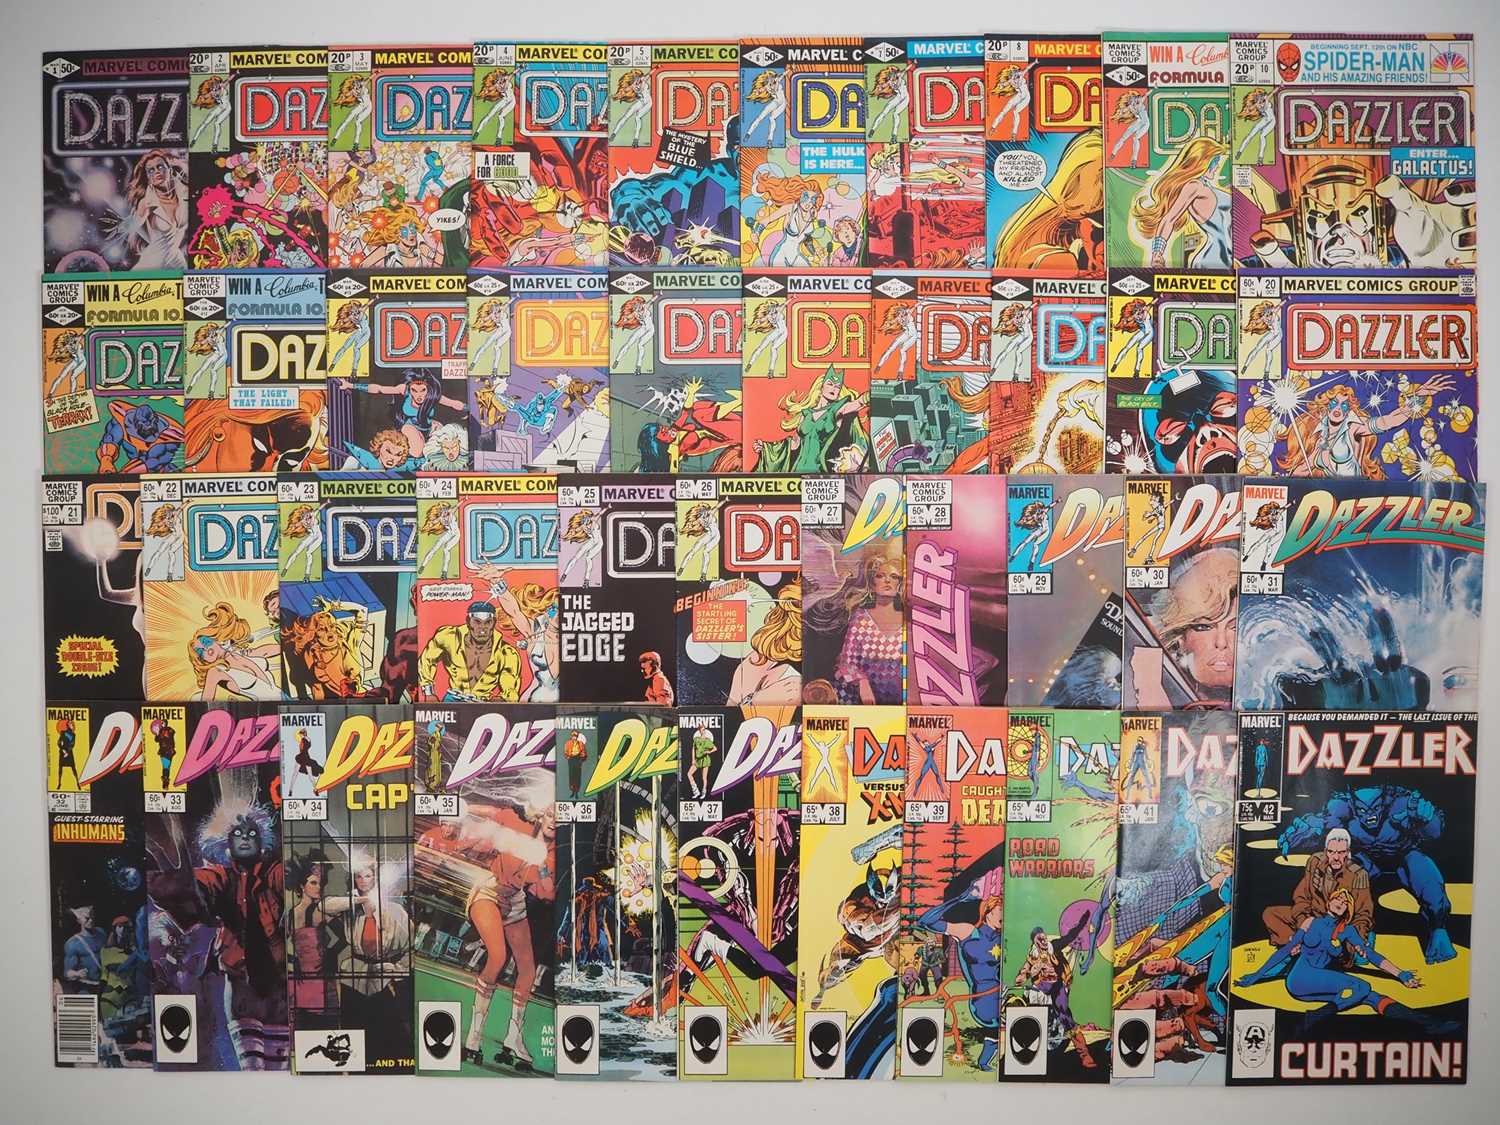 DAZZLER #1 to 42 (42 in Lot) - (1981/1986 - MARVEL) - Full complete run of Dazzler's first self-